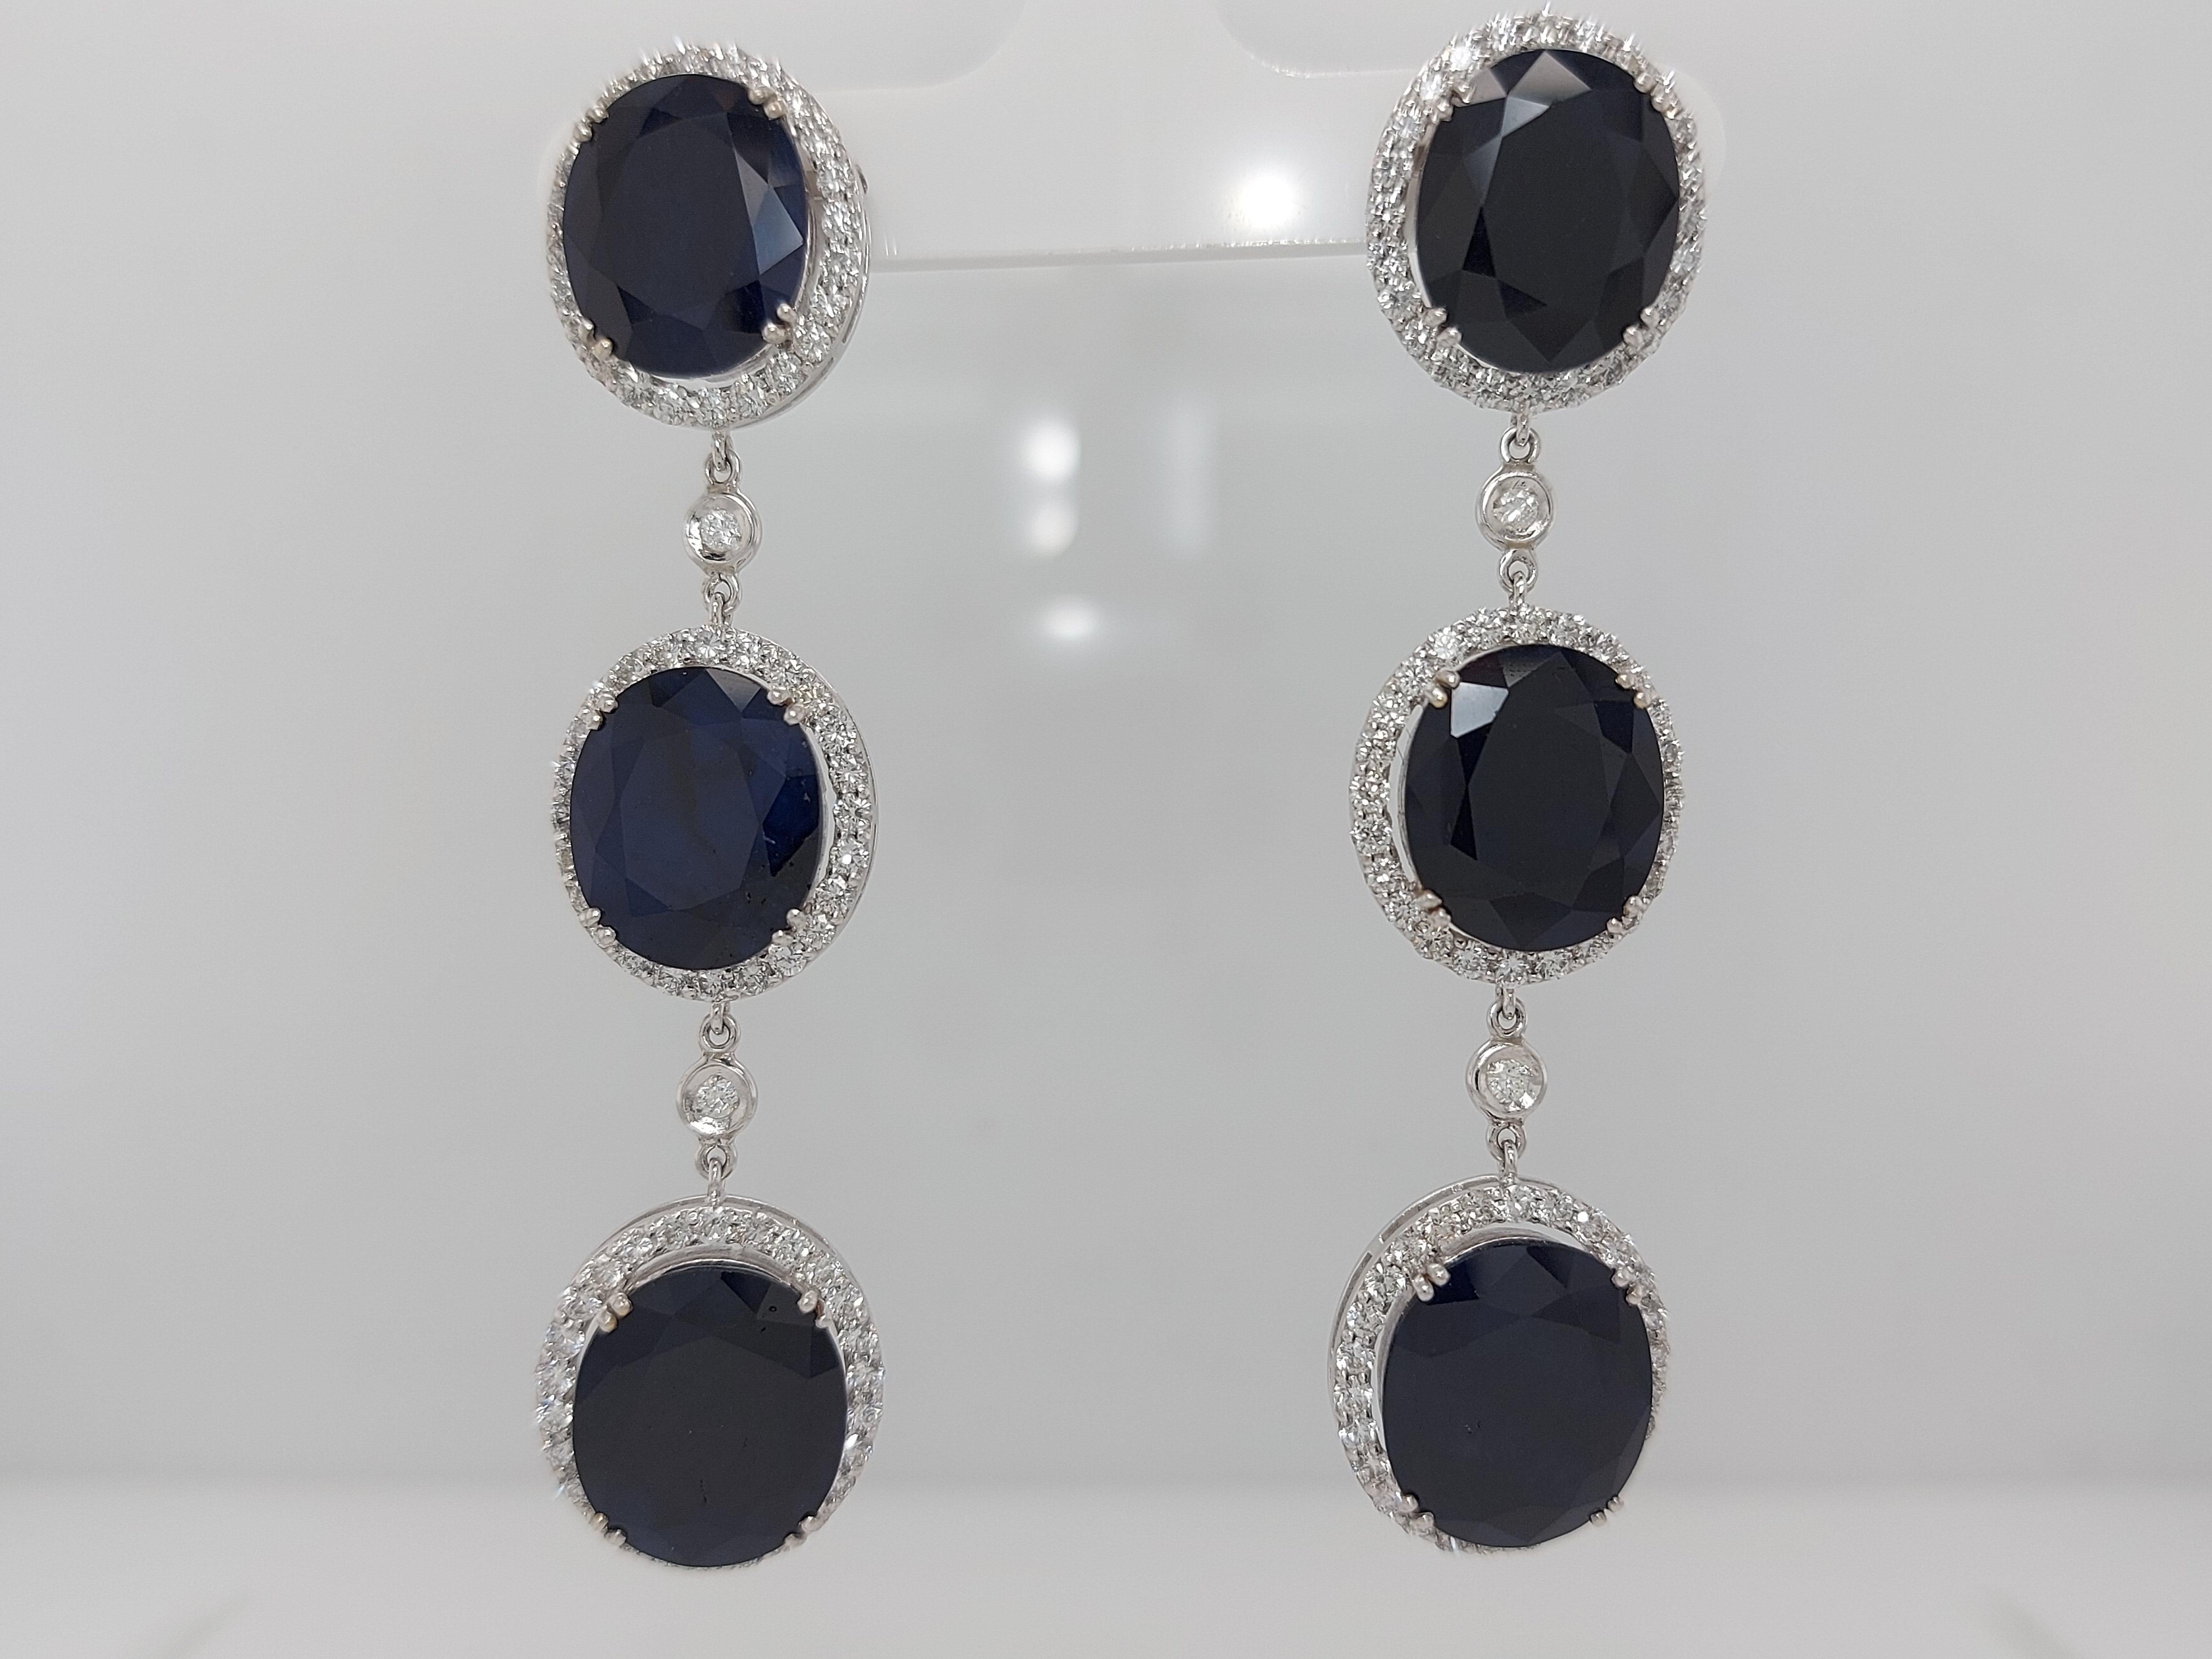 18kt White Gold Earrings 43.56ct Sapphire, 3.51ct Diamond For Sale 2